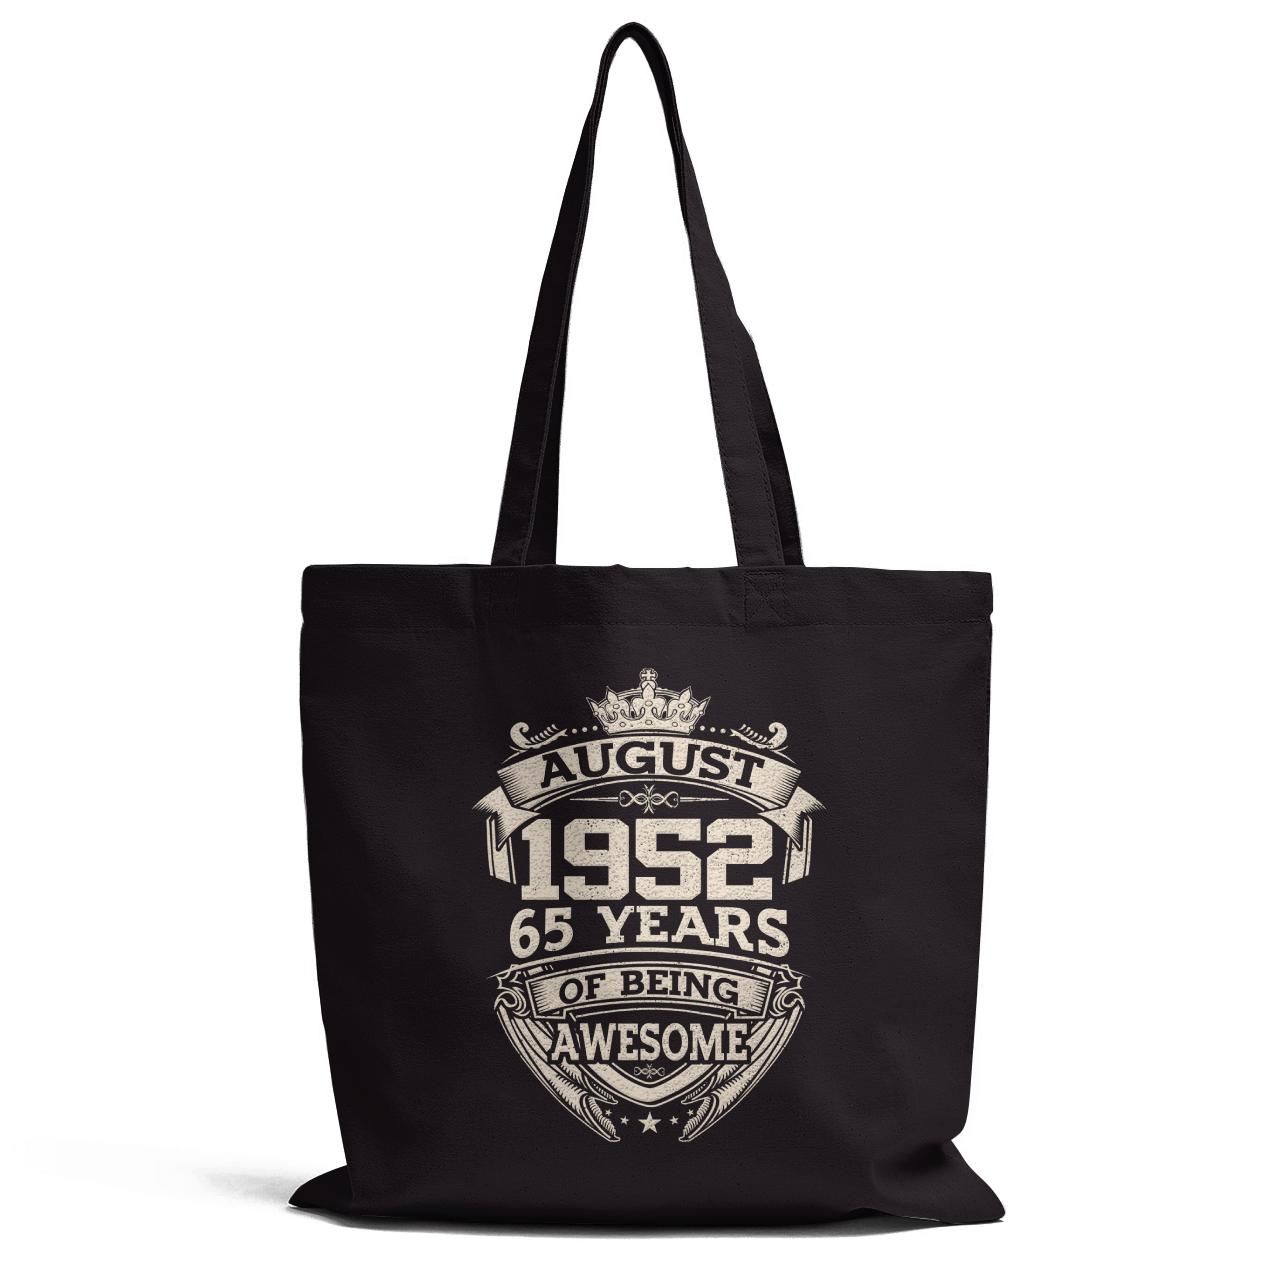 August 1952 65 Years Of Being Awesome Tote Bag